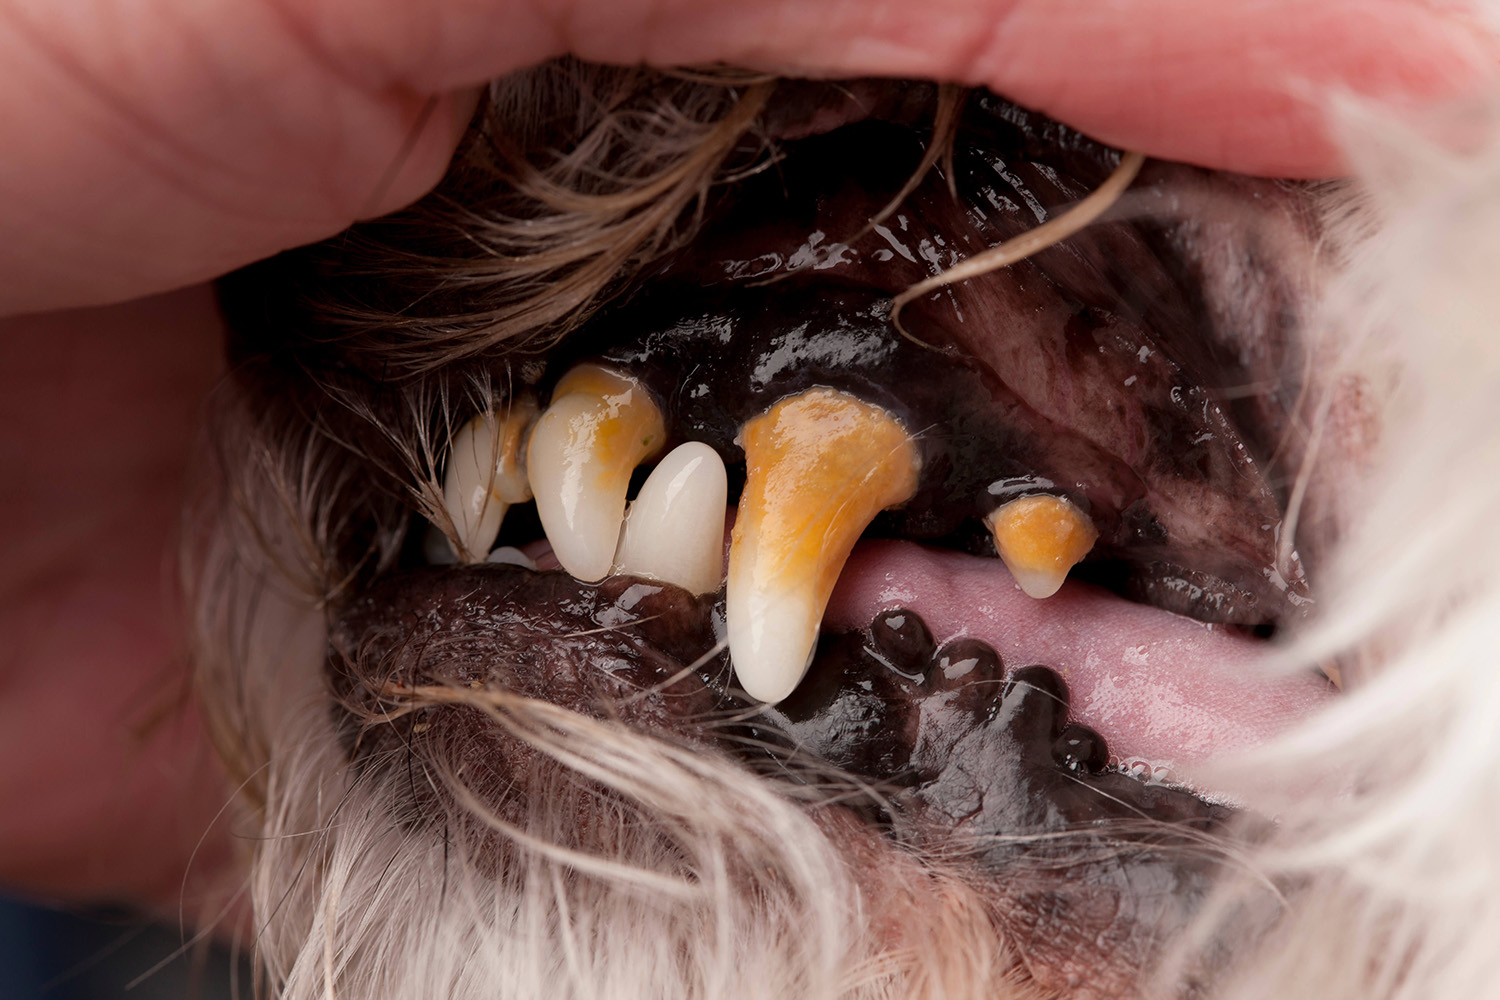 A close up of a dog's mouth, showing tartar build up on teeth